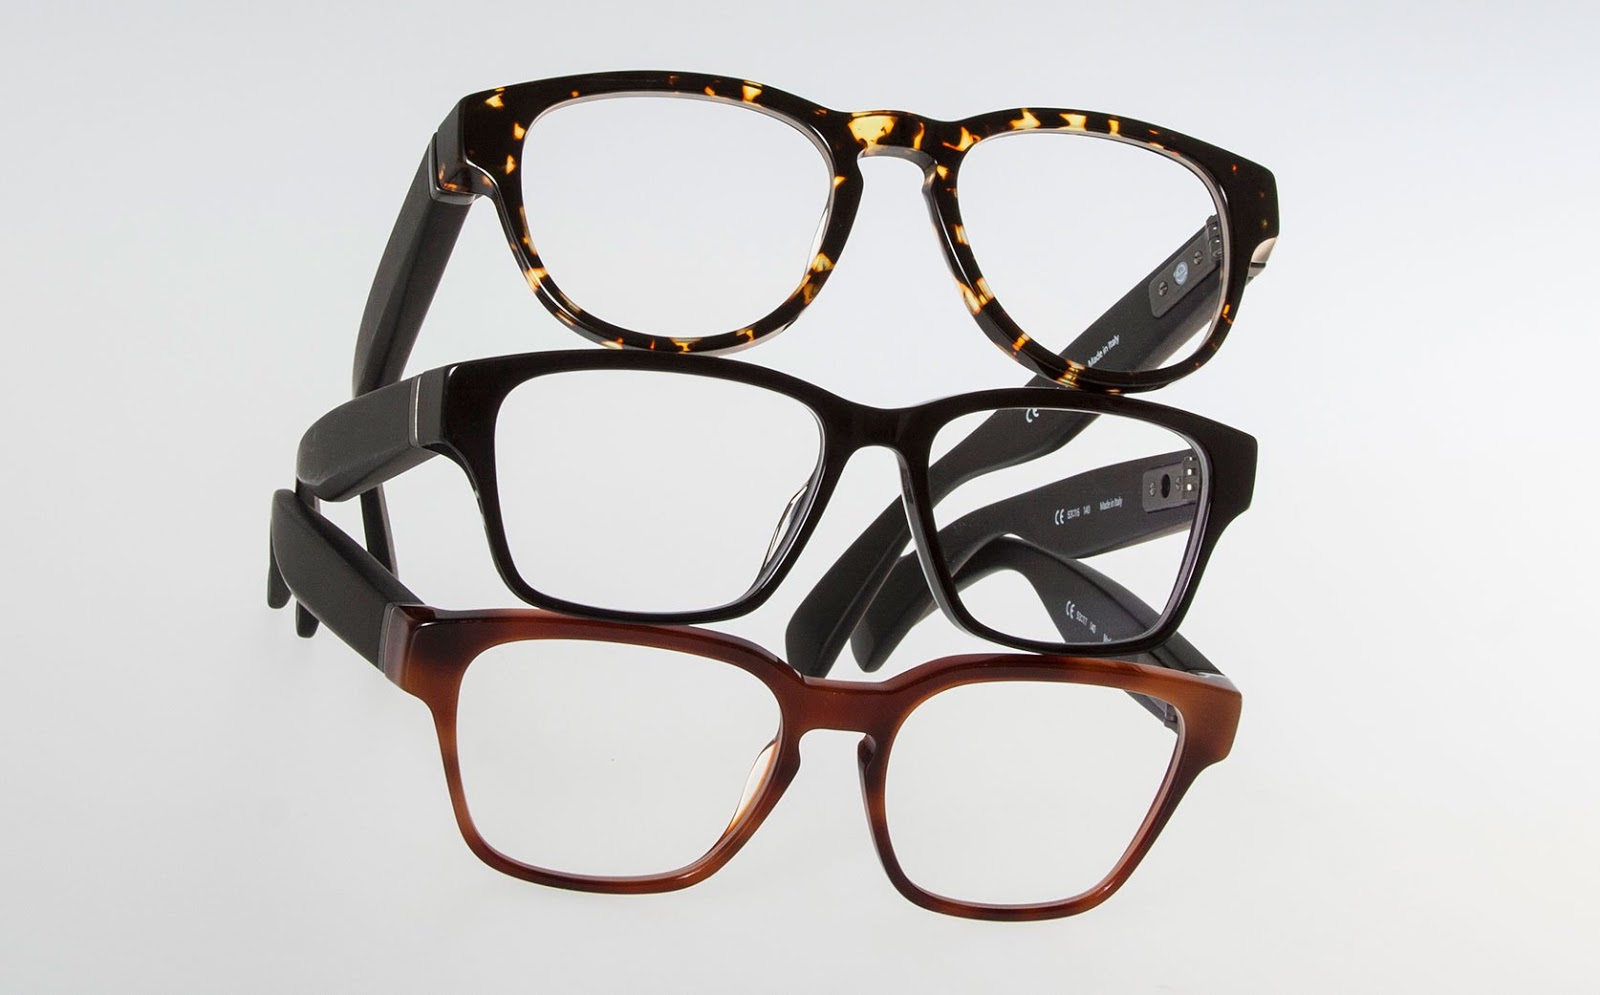 techamidi-level-glasses-with-smart-design-and-specifications-from-vsp